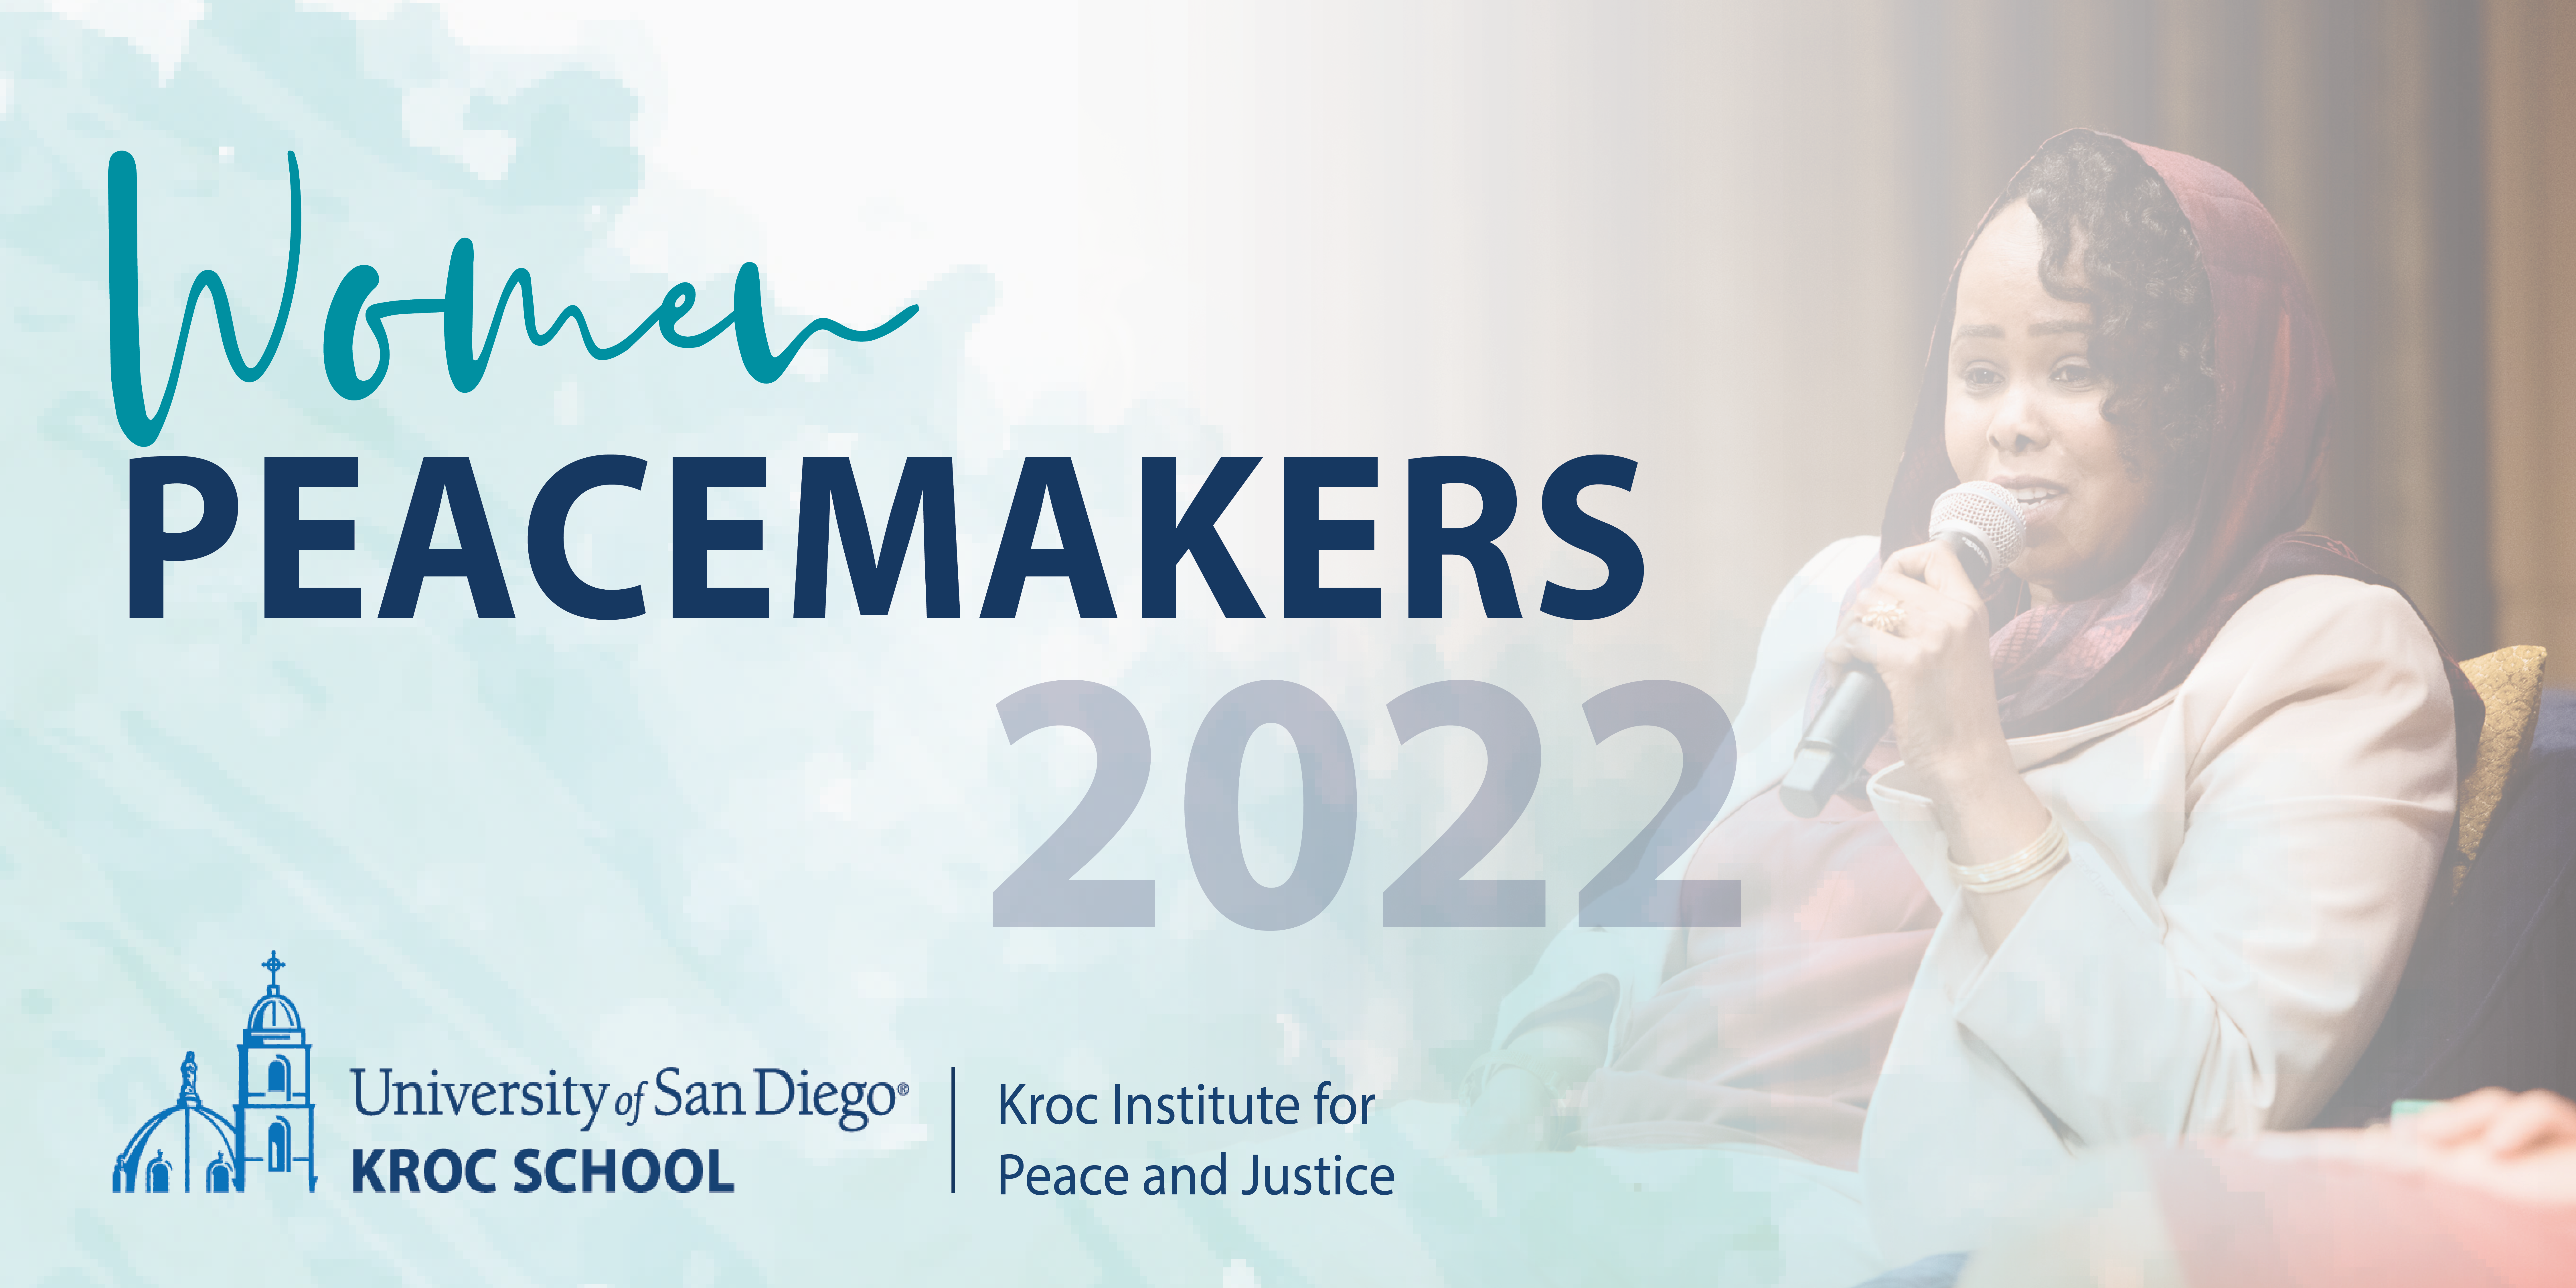 Kroc IPJ Welcomes a New In-Person Cohort of Women PeaceMakers